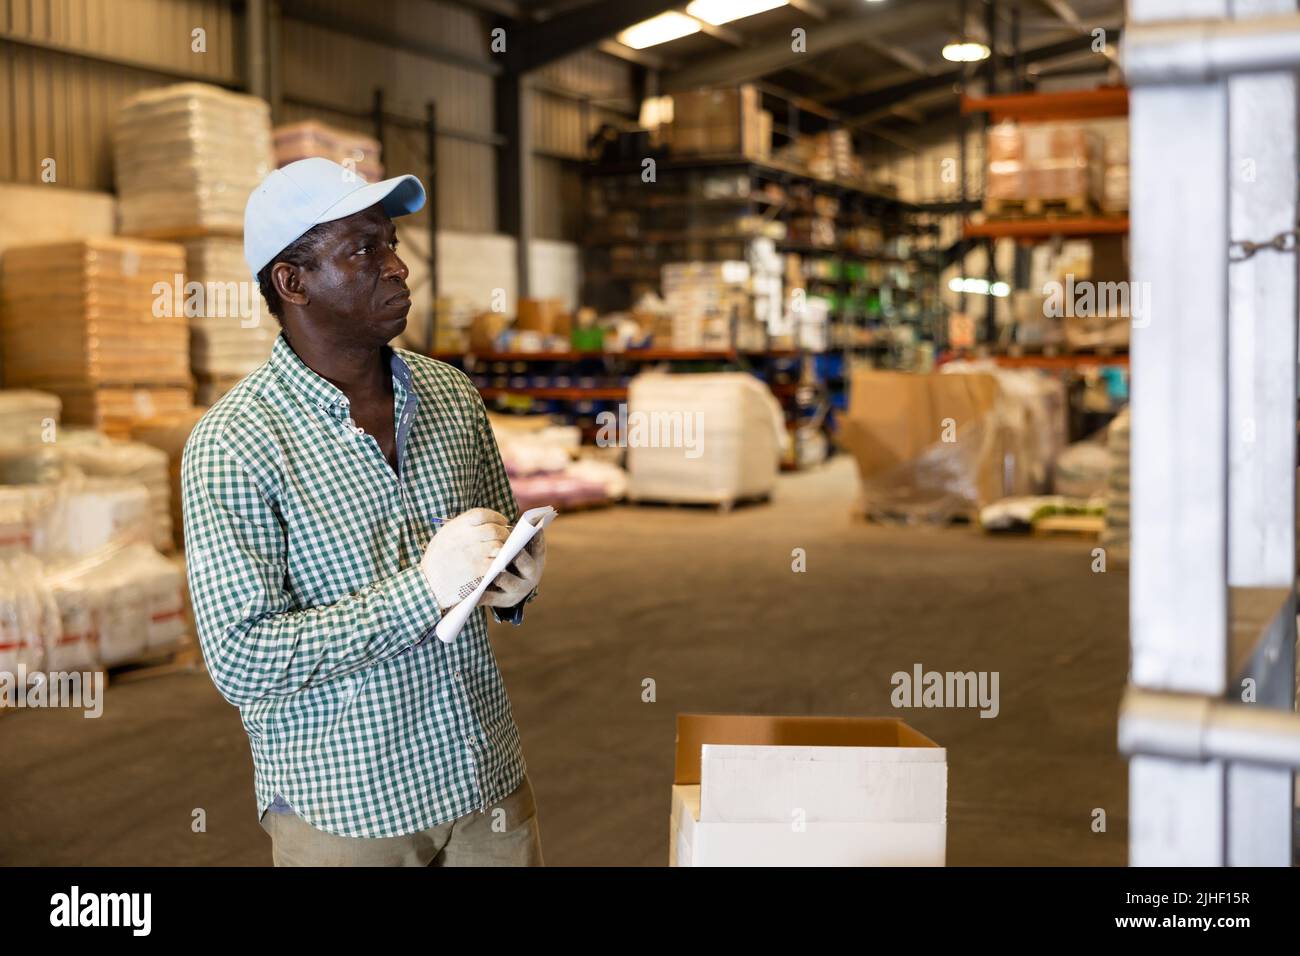 Portrait of focused African-American man checking order list Stock Photo